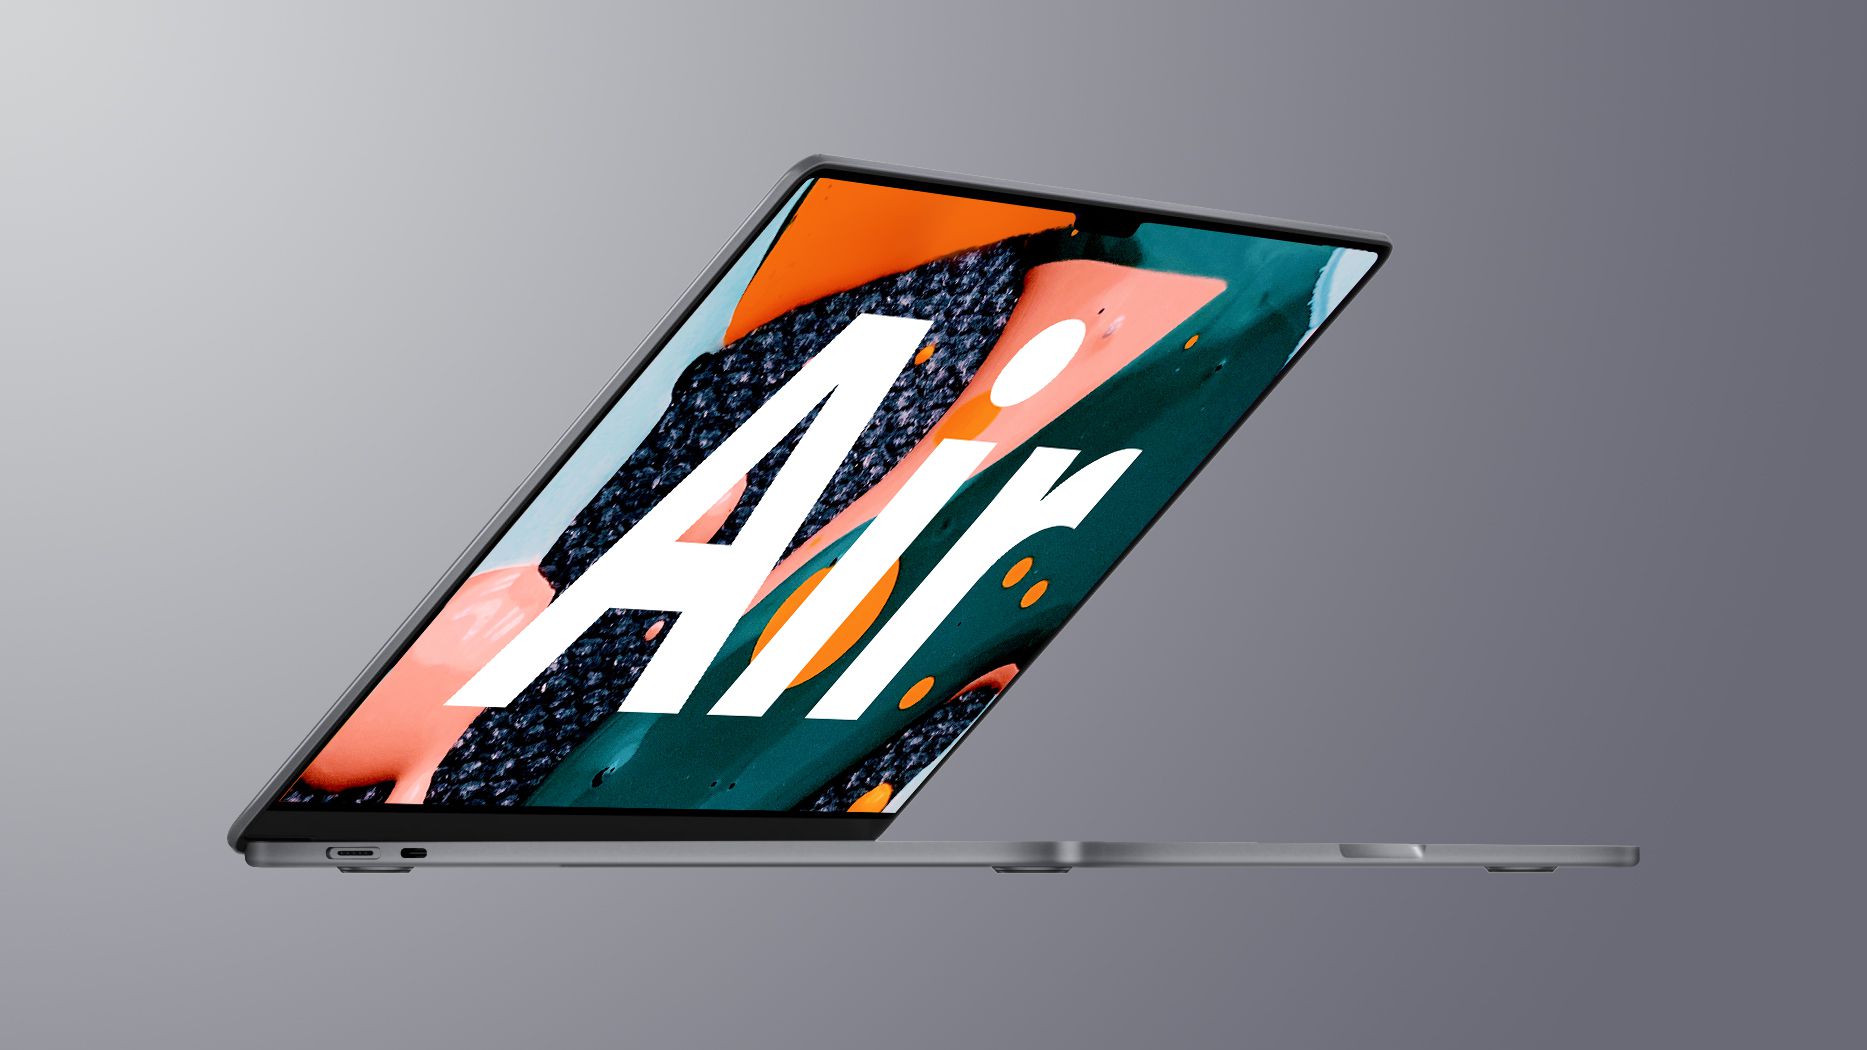 2022 MacBook Air Rumors: Non-Tapered Design With Notched Mini-LED Display, MagSafe, ‘M2’ Chip, and More - MacRumors